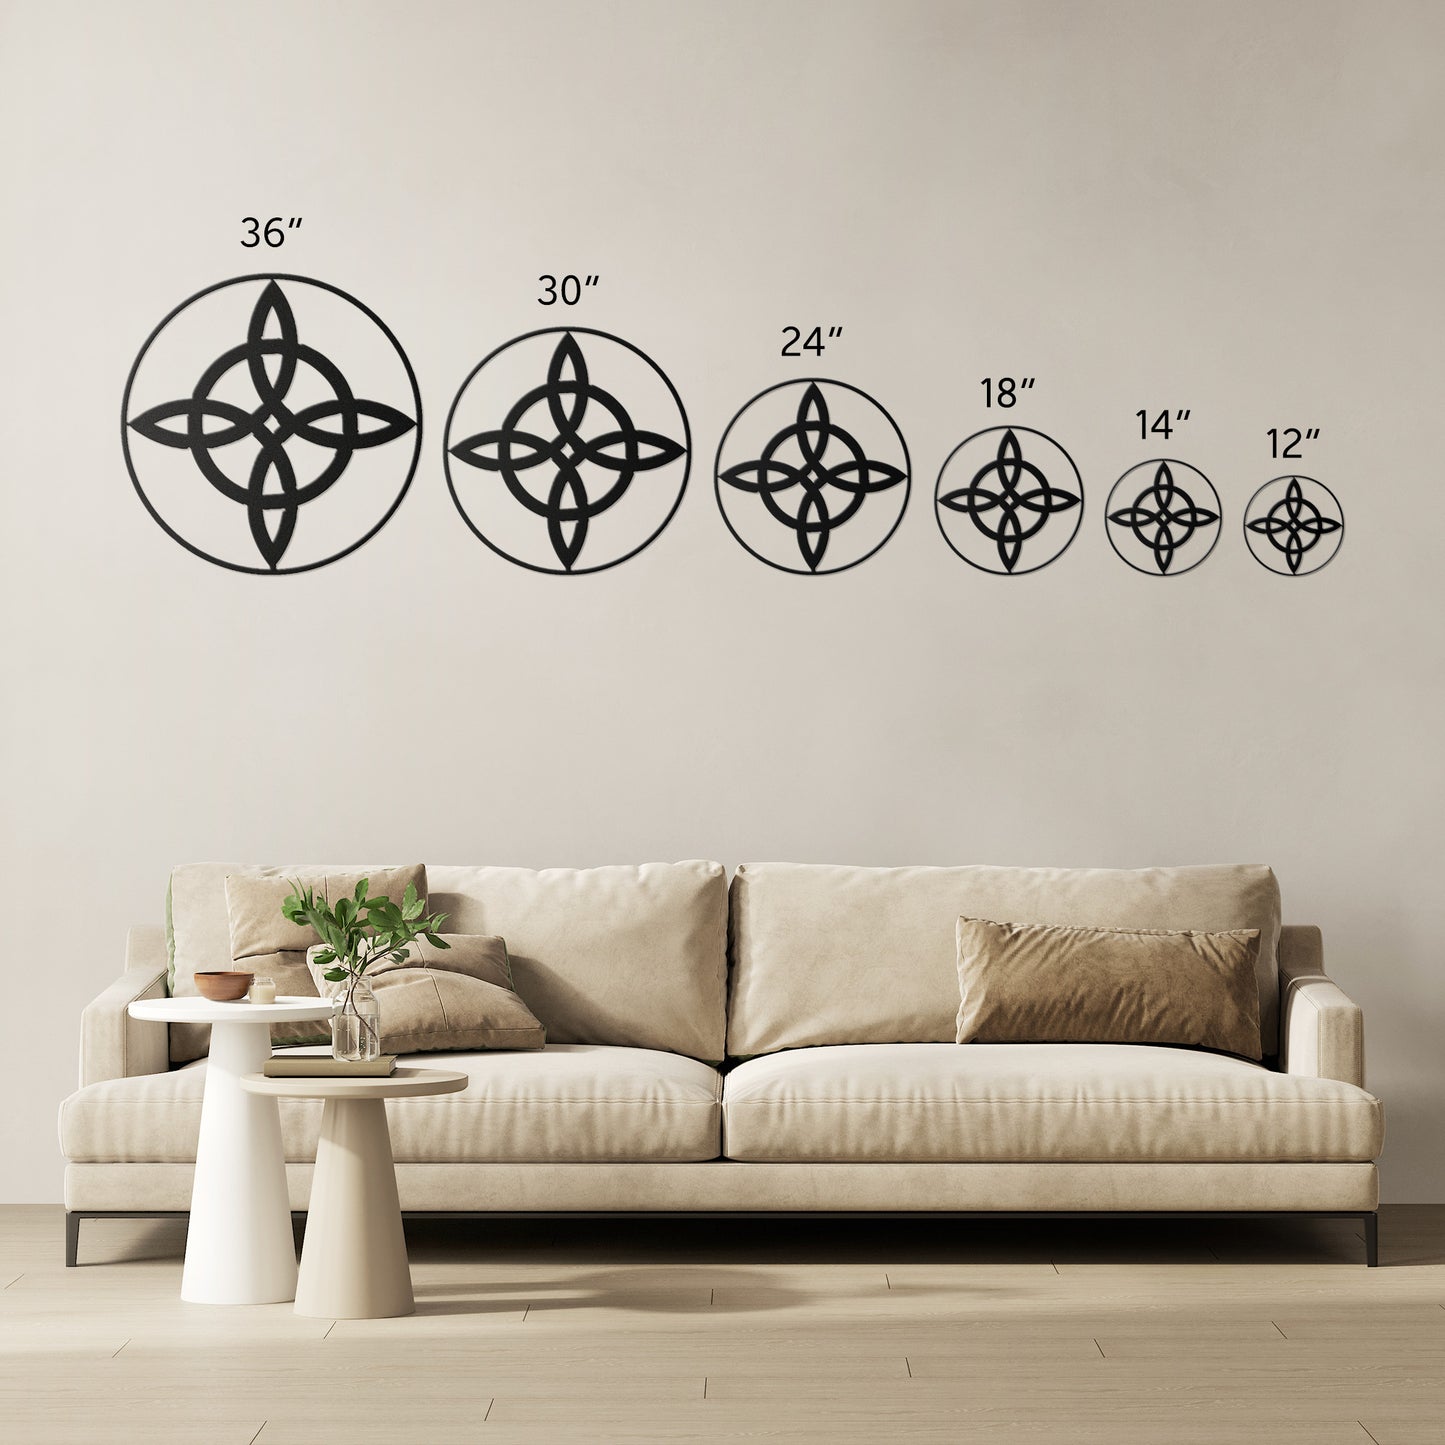 Custom Witches Knot Metal Wall Art